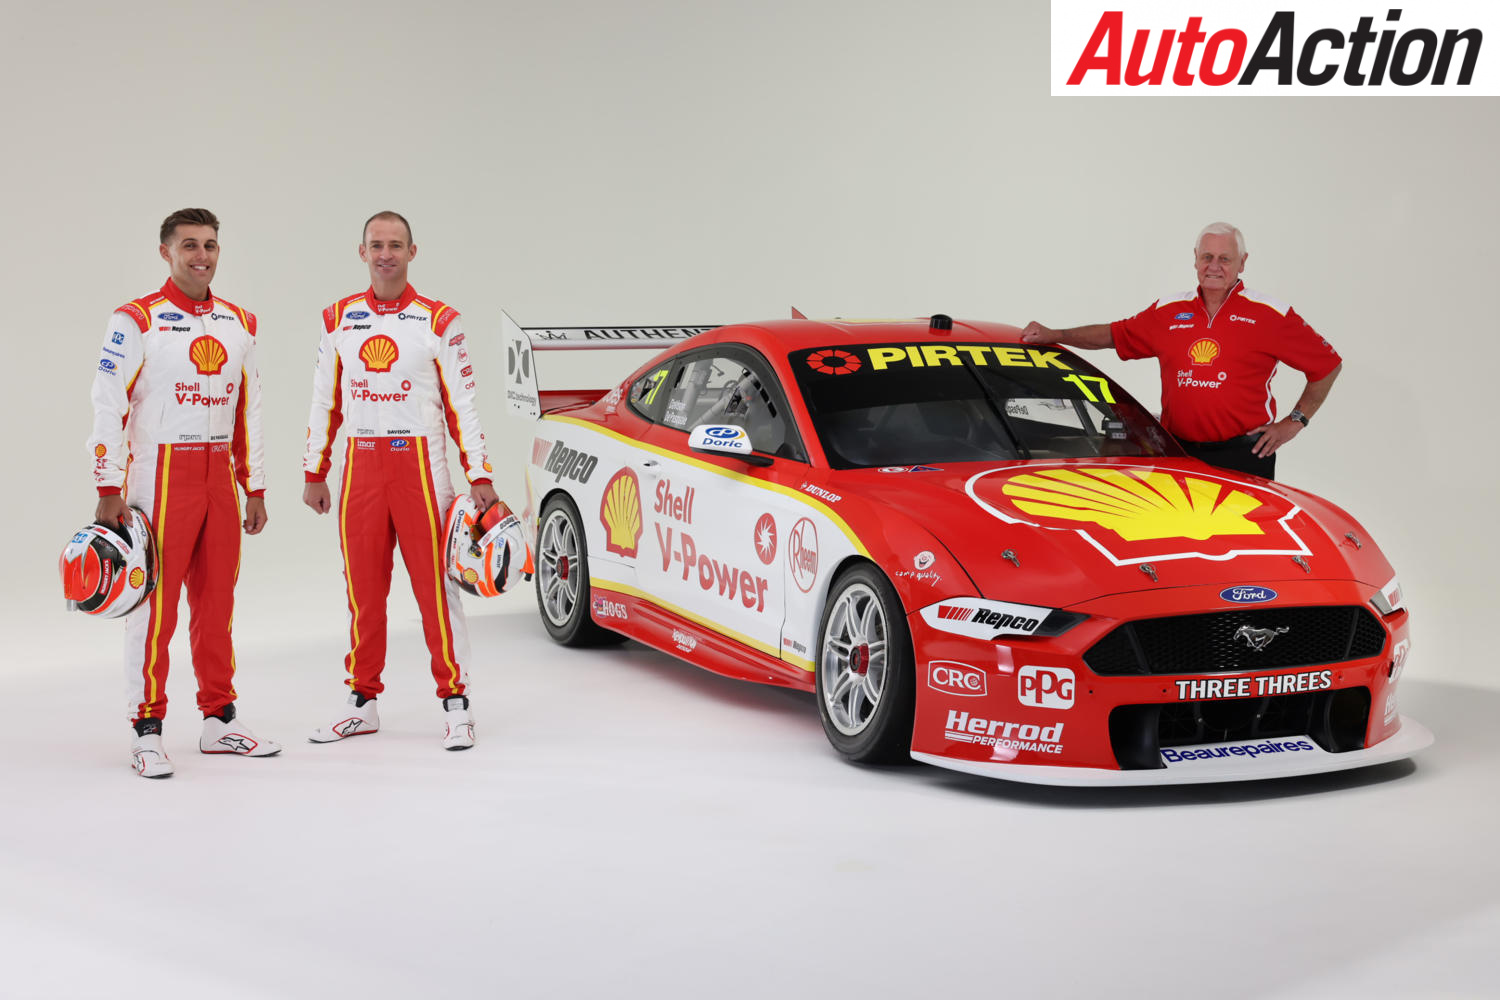 Dick Johnson Racing launch new era - Images: Supplied